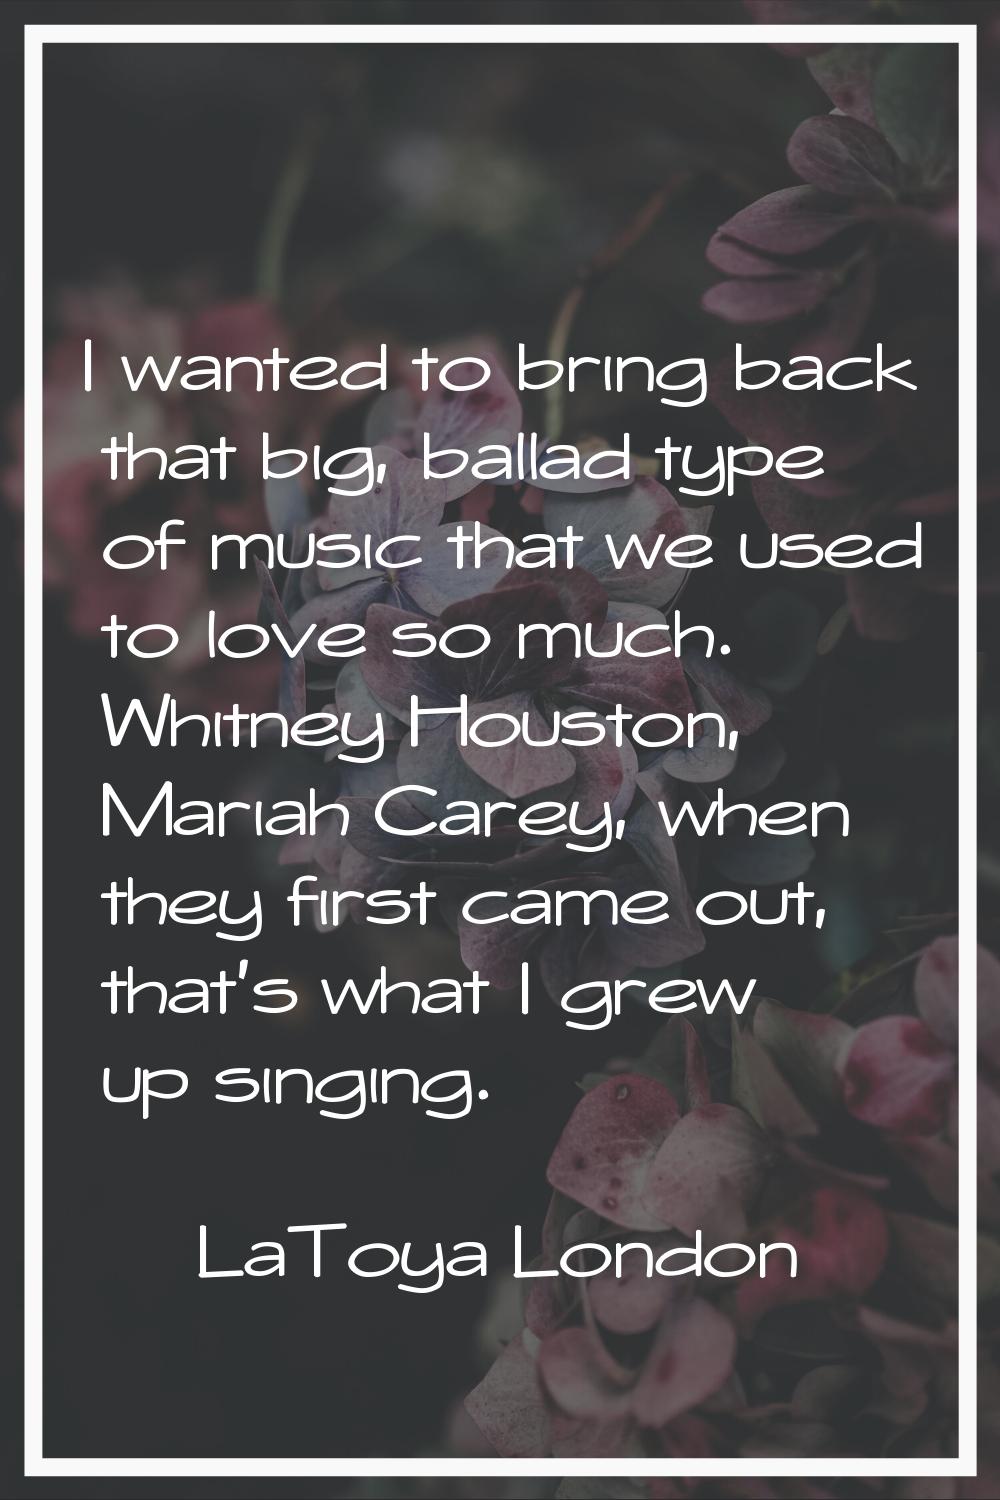 I wanted to bring back that big, ballad type of music that we used to love so much. Whitney Houston